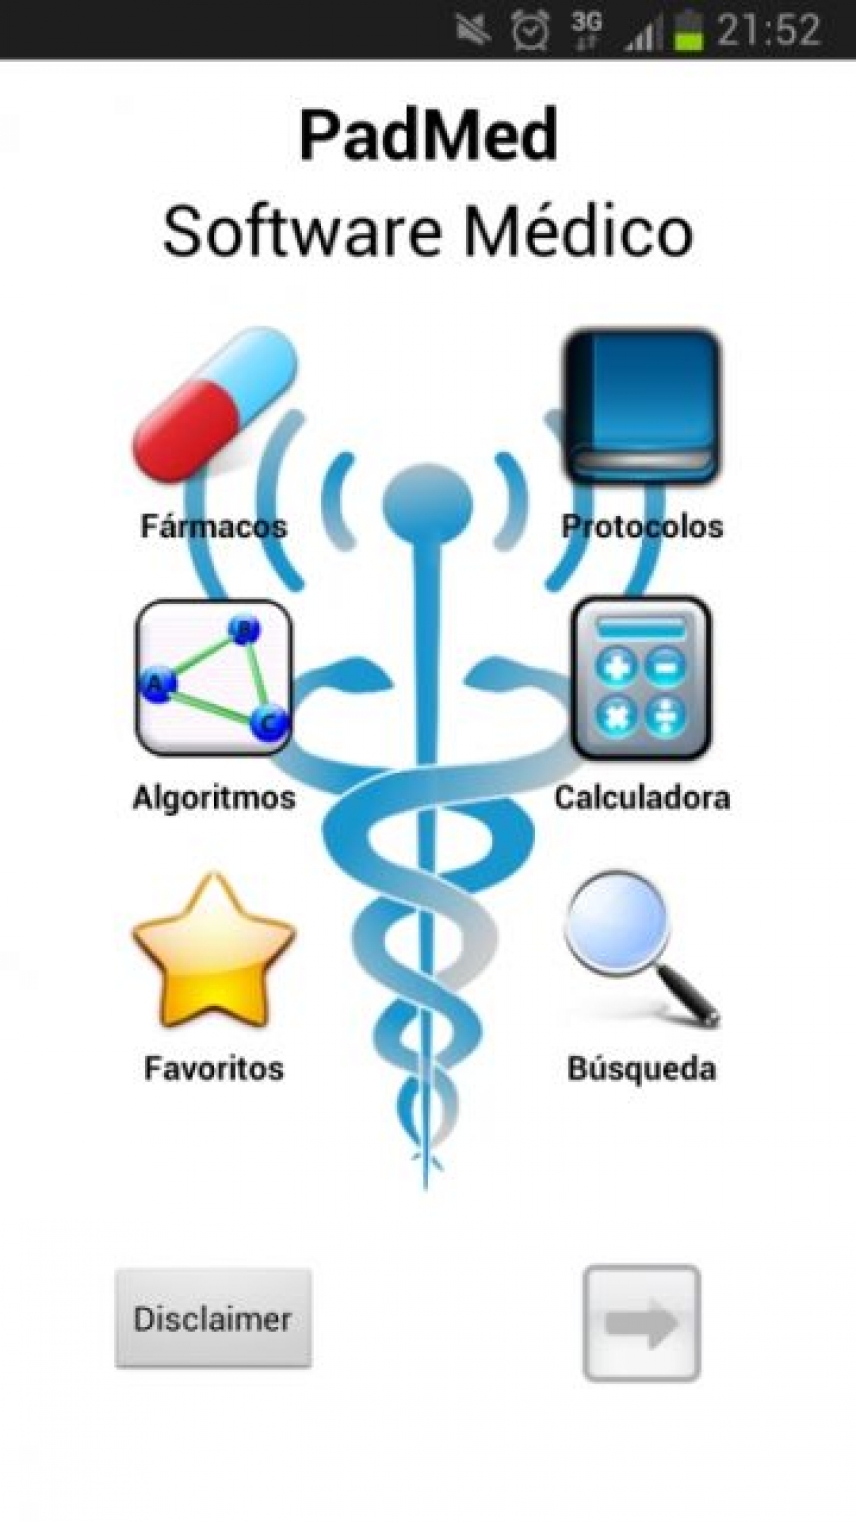 IMIBIC Researchers create PadMed, a mobile application to facilitate daily medical practice